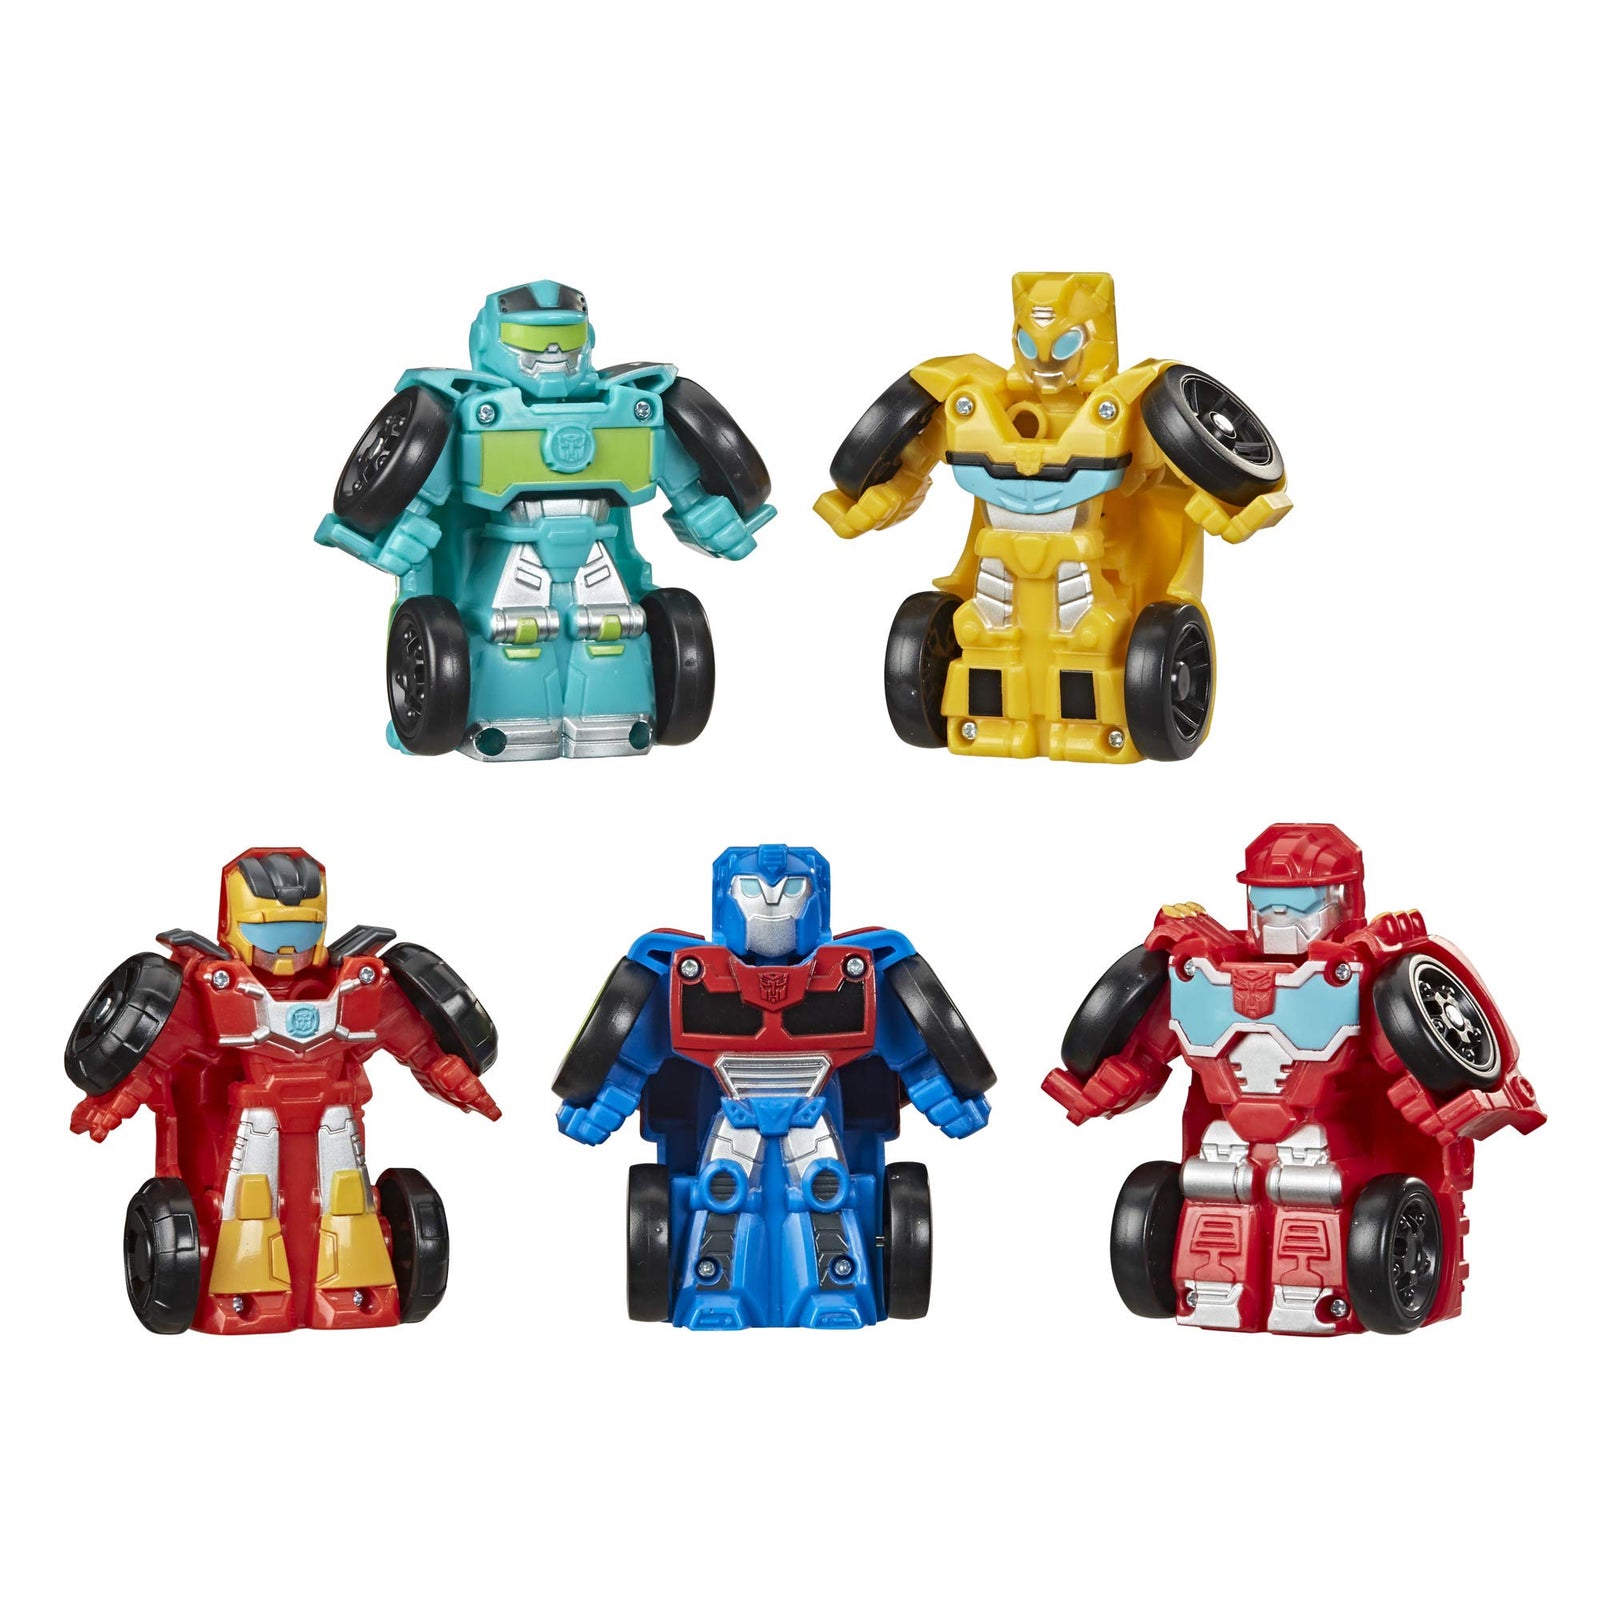 Playskool Heroes Transformers Rescue Bots Academy Mini Bot Racers Converting Robot Toy 5-Pack, 2-Inch Collectible Toy Cars (Amazon Exclusive)